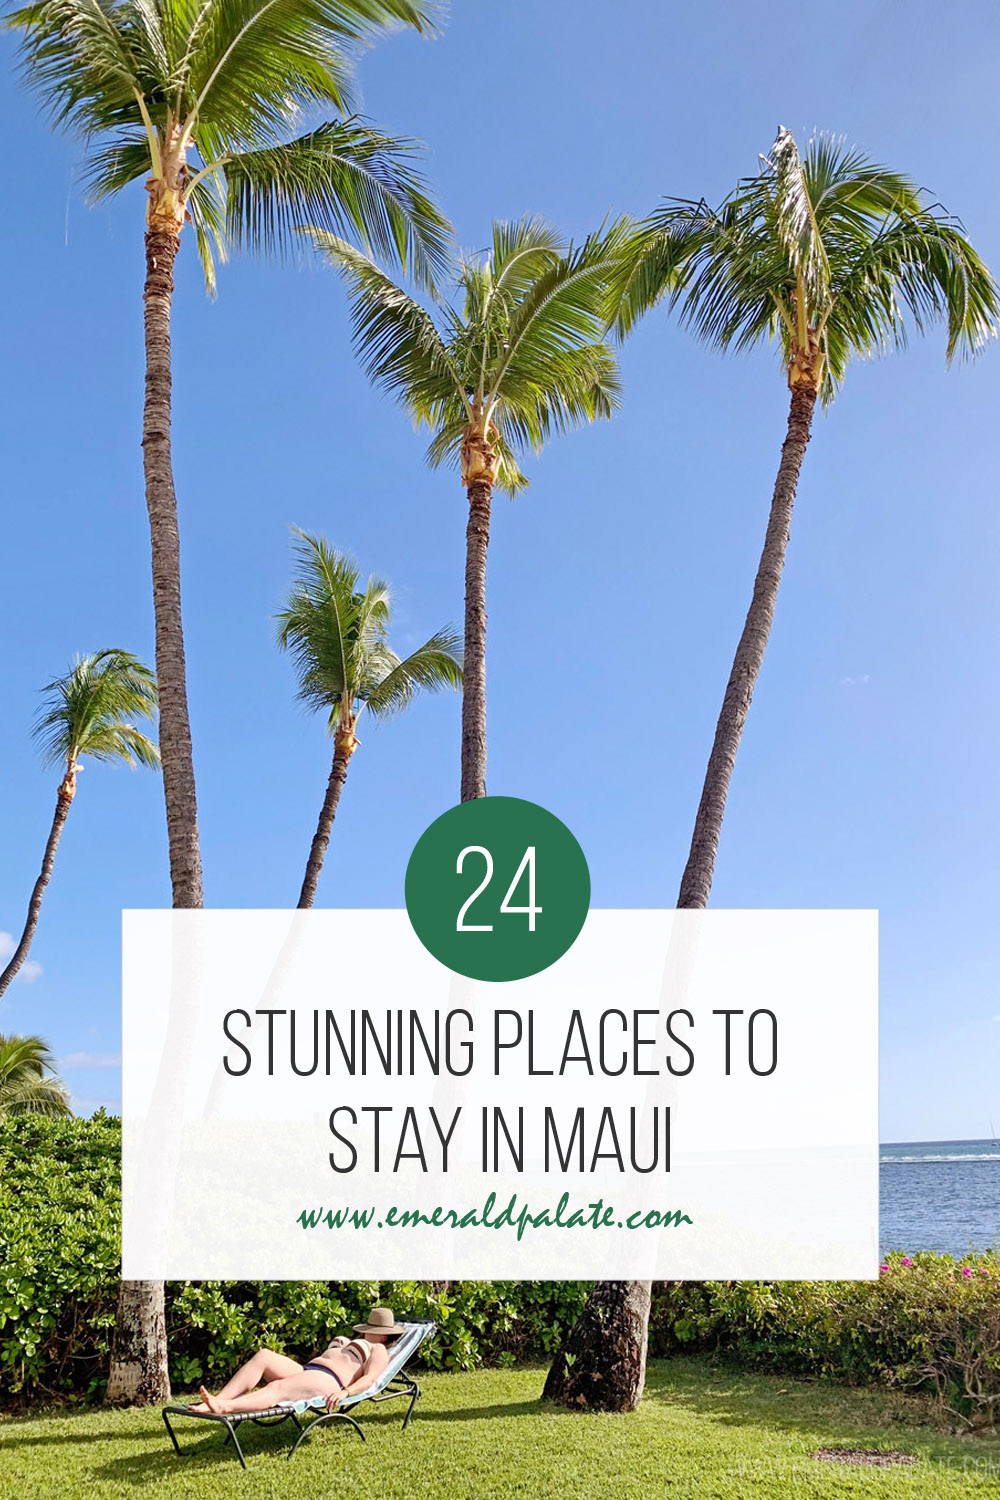 Where to stay in Maui: a breakdown of the best areas by price, beaches, snorkeling, location, and more. Find the best area to stay in Maui, plus 24 unique places to stay in Maui.